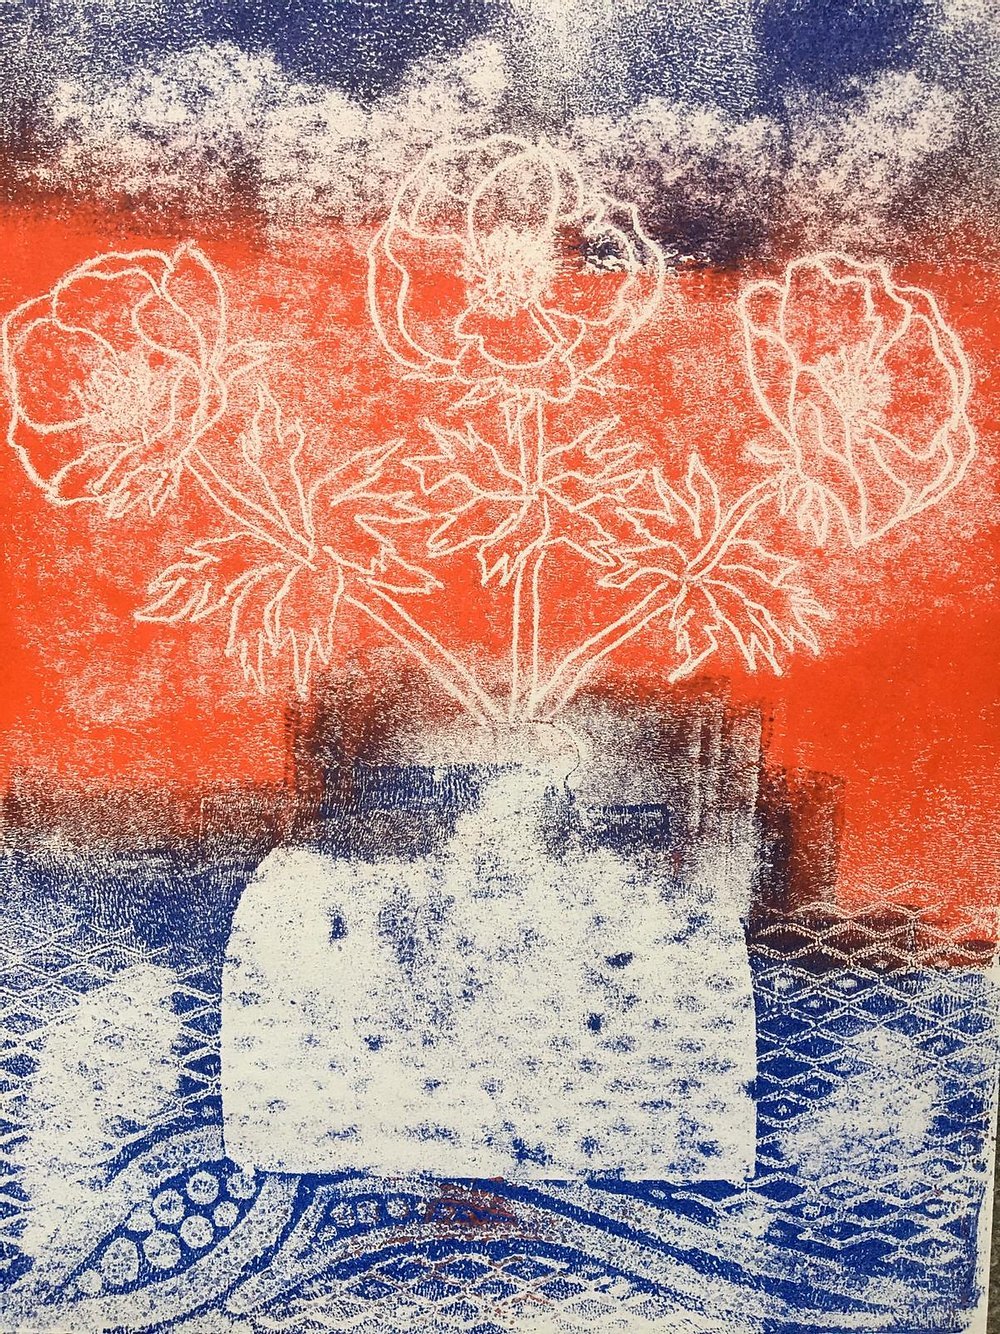 Introduction to monoprinting